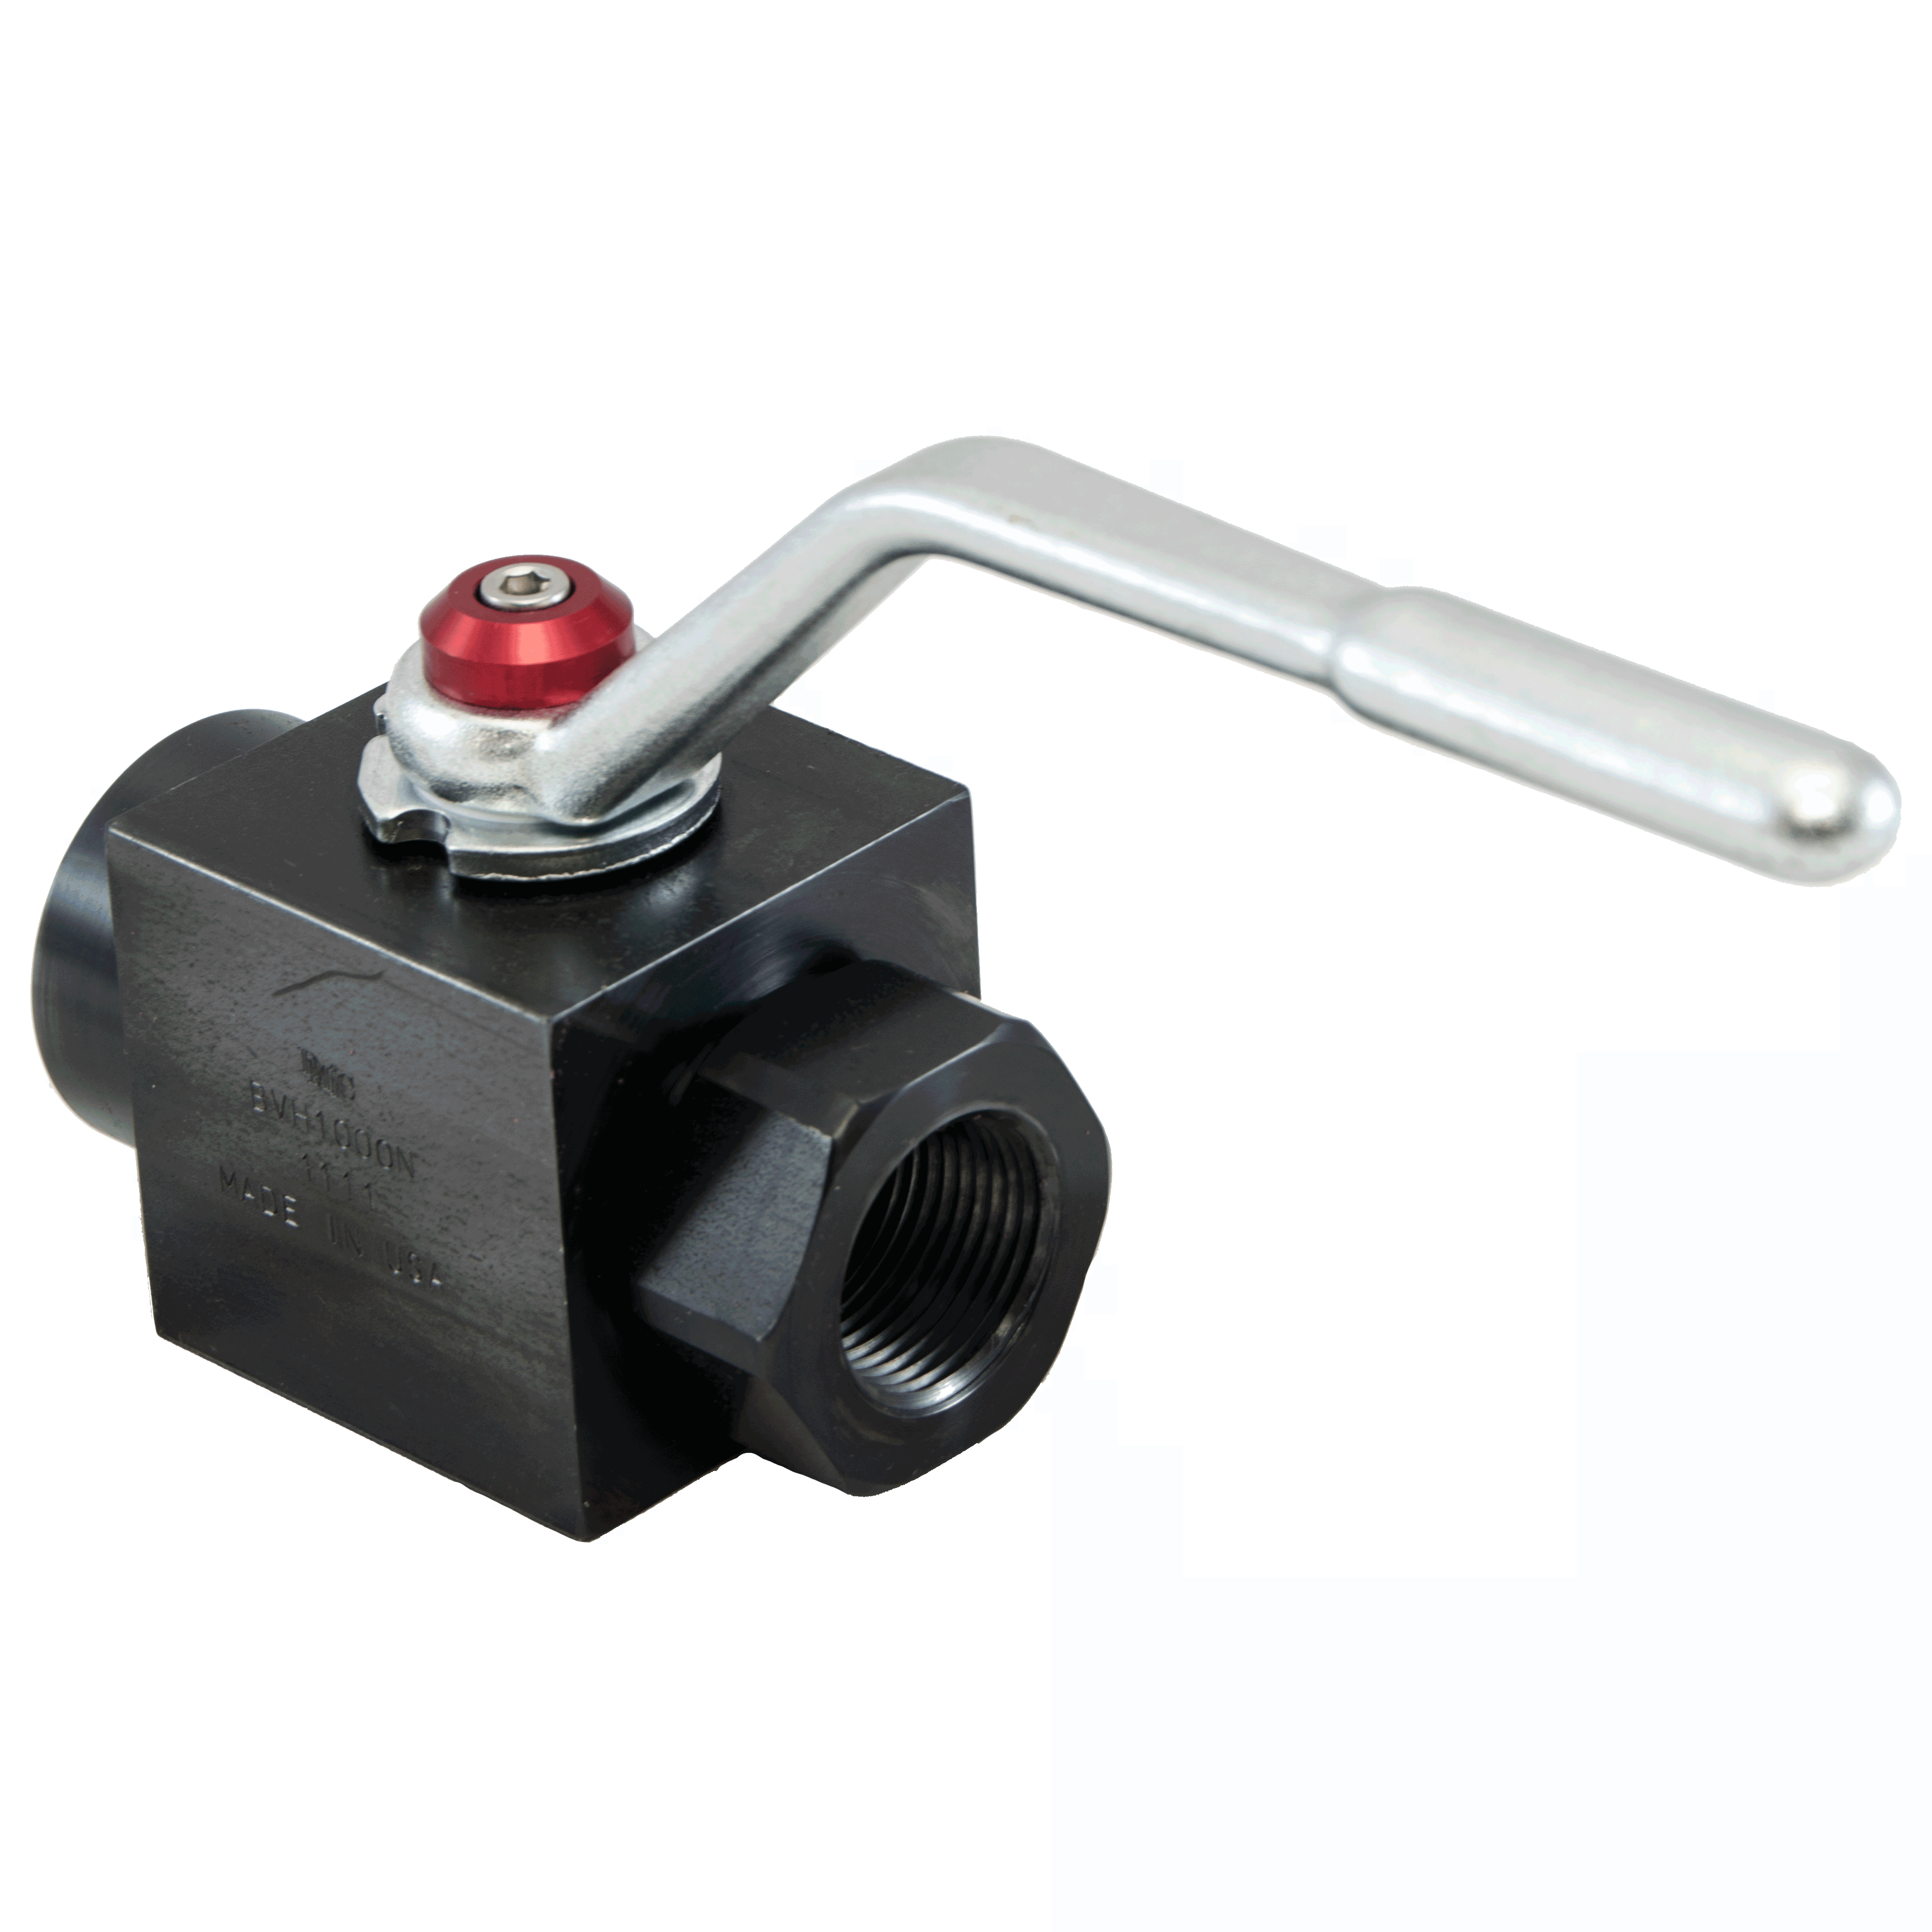 BVH-0750N-1111 : DMIC Square Body Ball Valve, 3/4 NPT, Carbon Steel, 6000psi, Two-Way